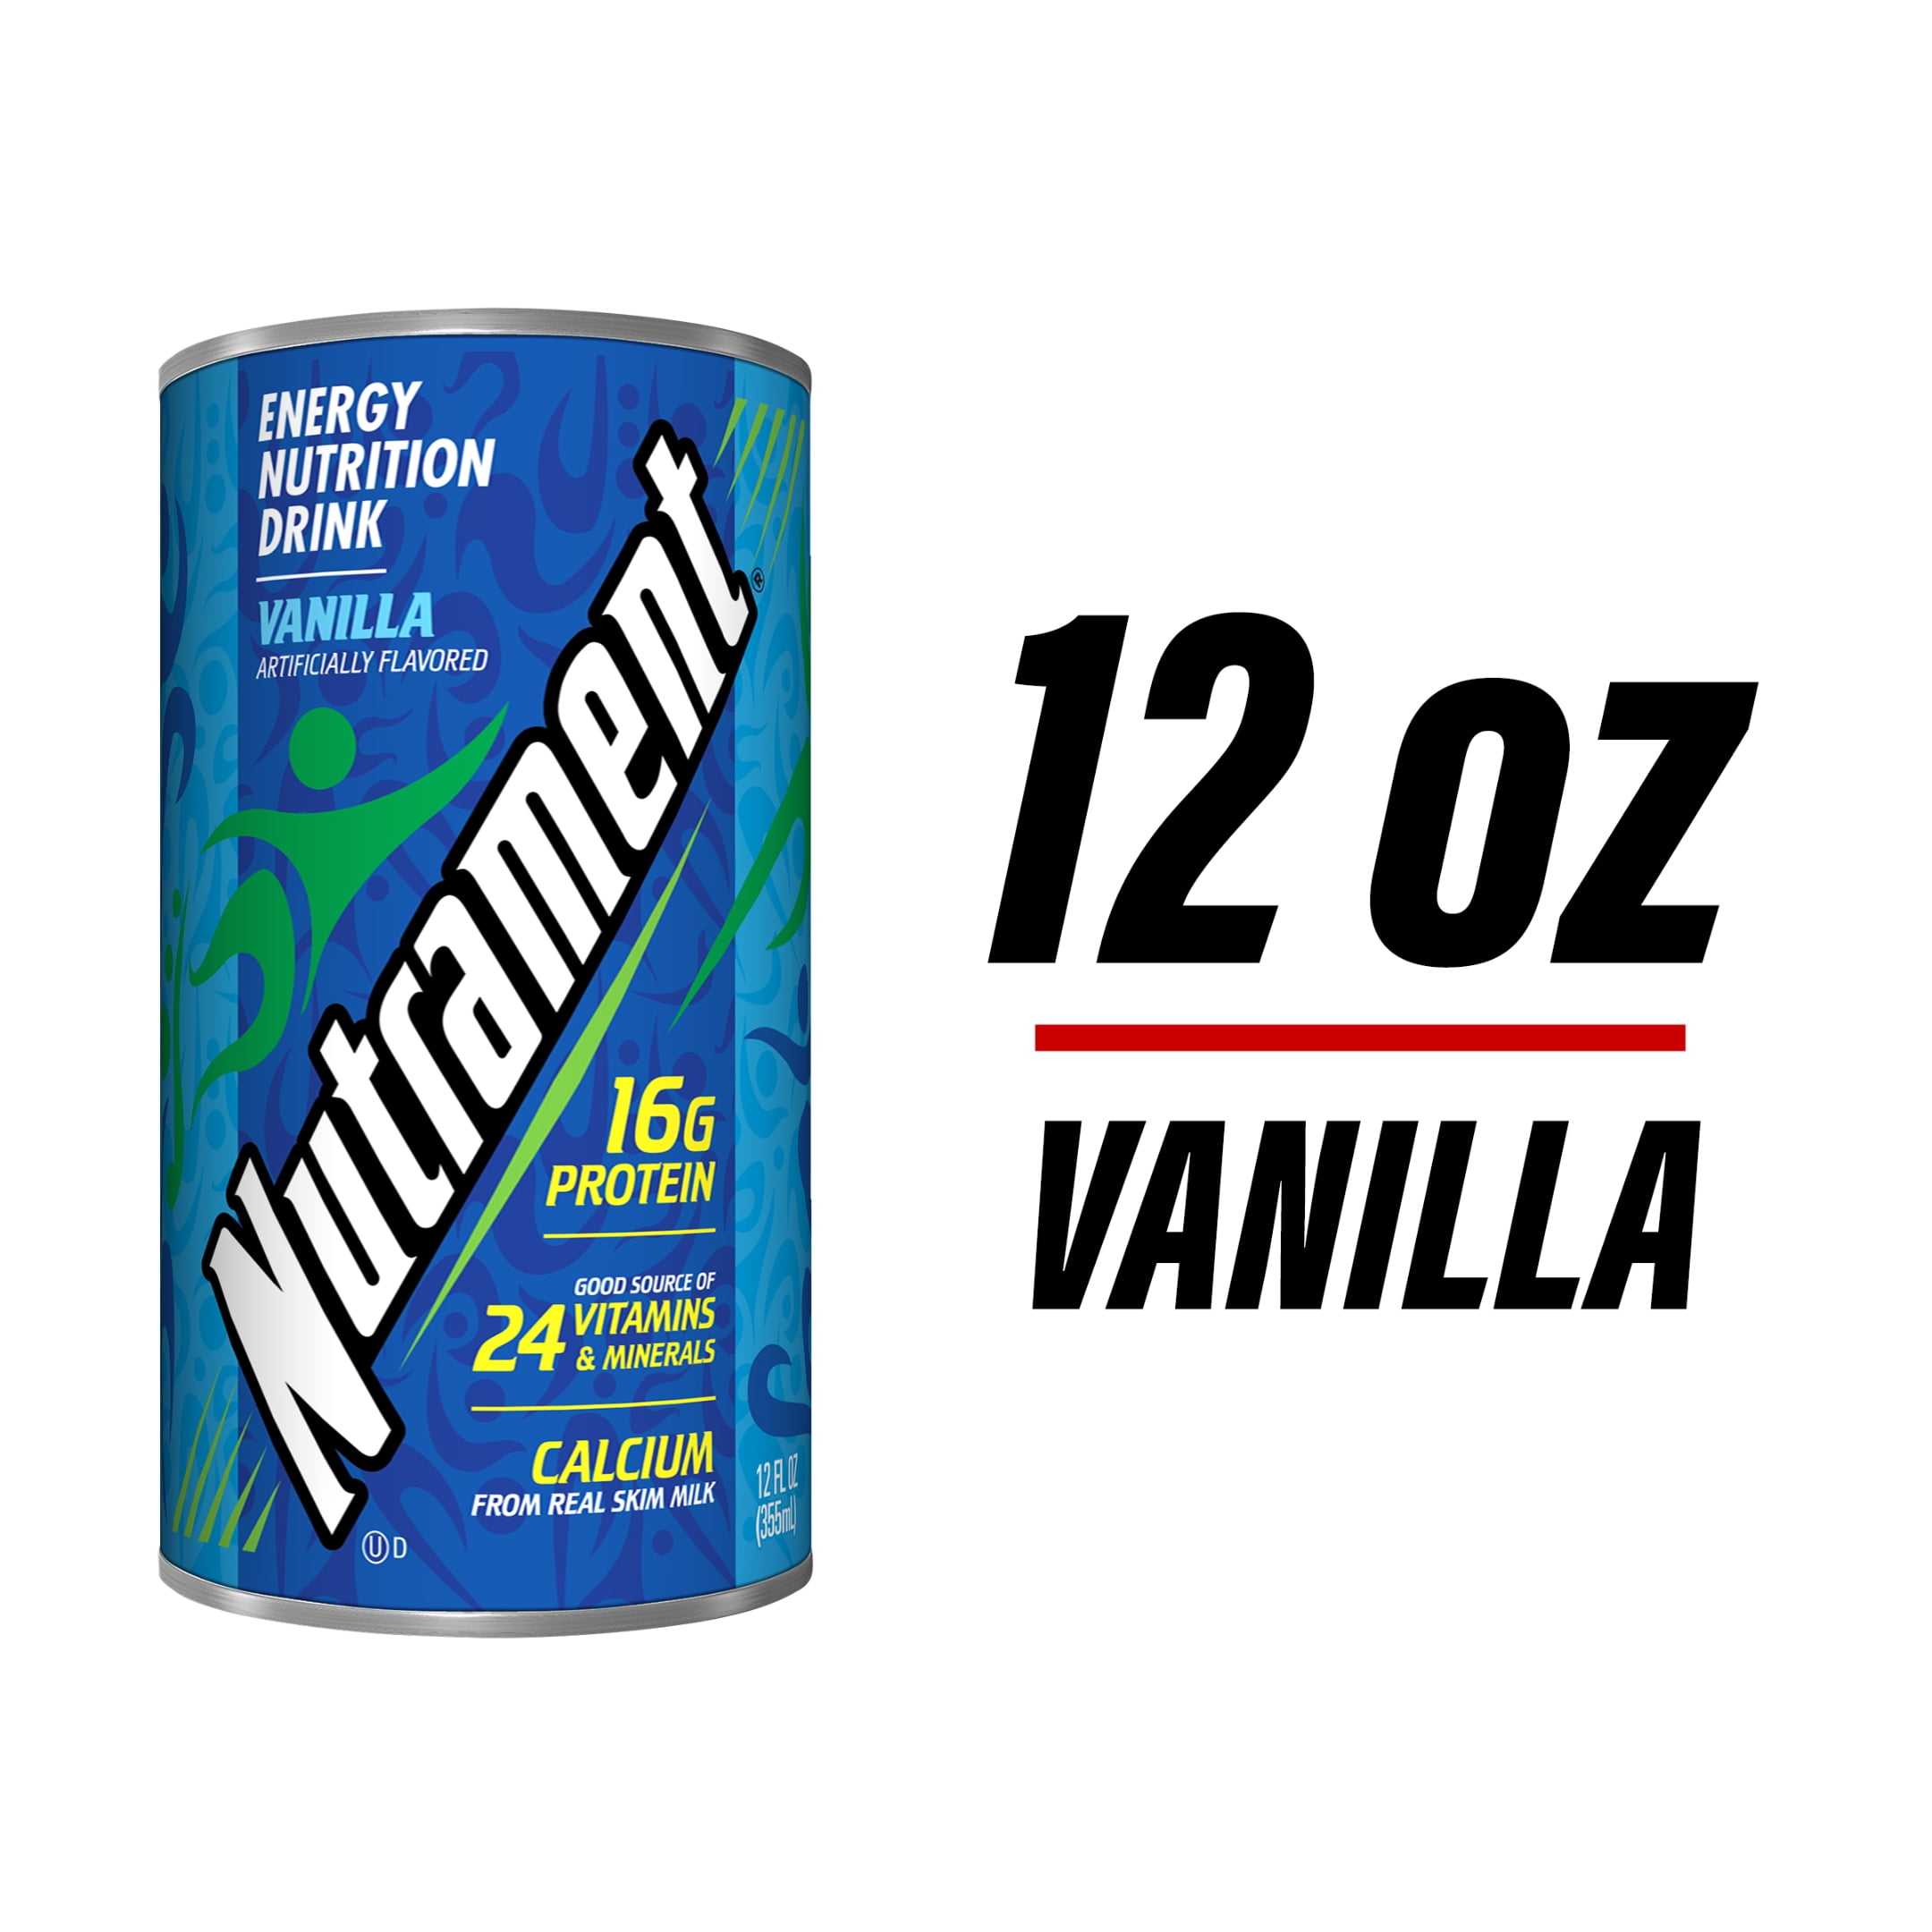 Nutrament Vanilla Nutrition Drink, Energy Drink with Vitamins, Minerals and Protein, 12 FL OZ